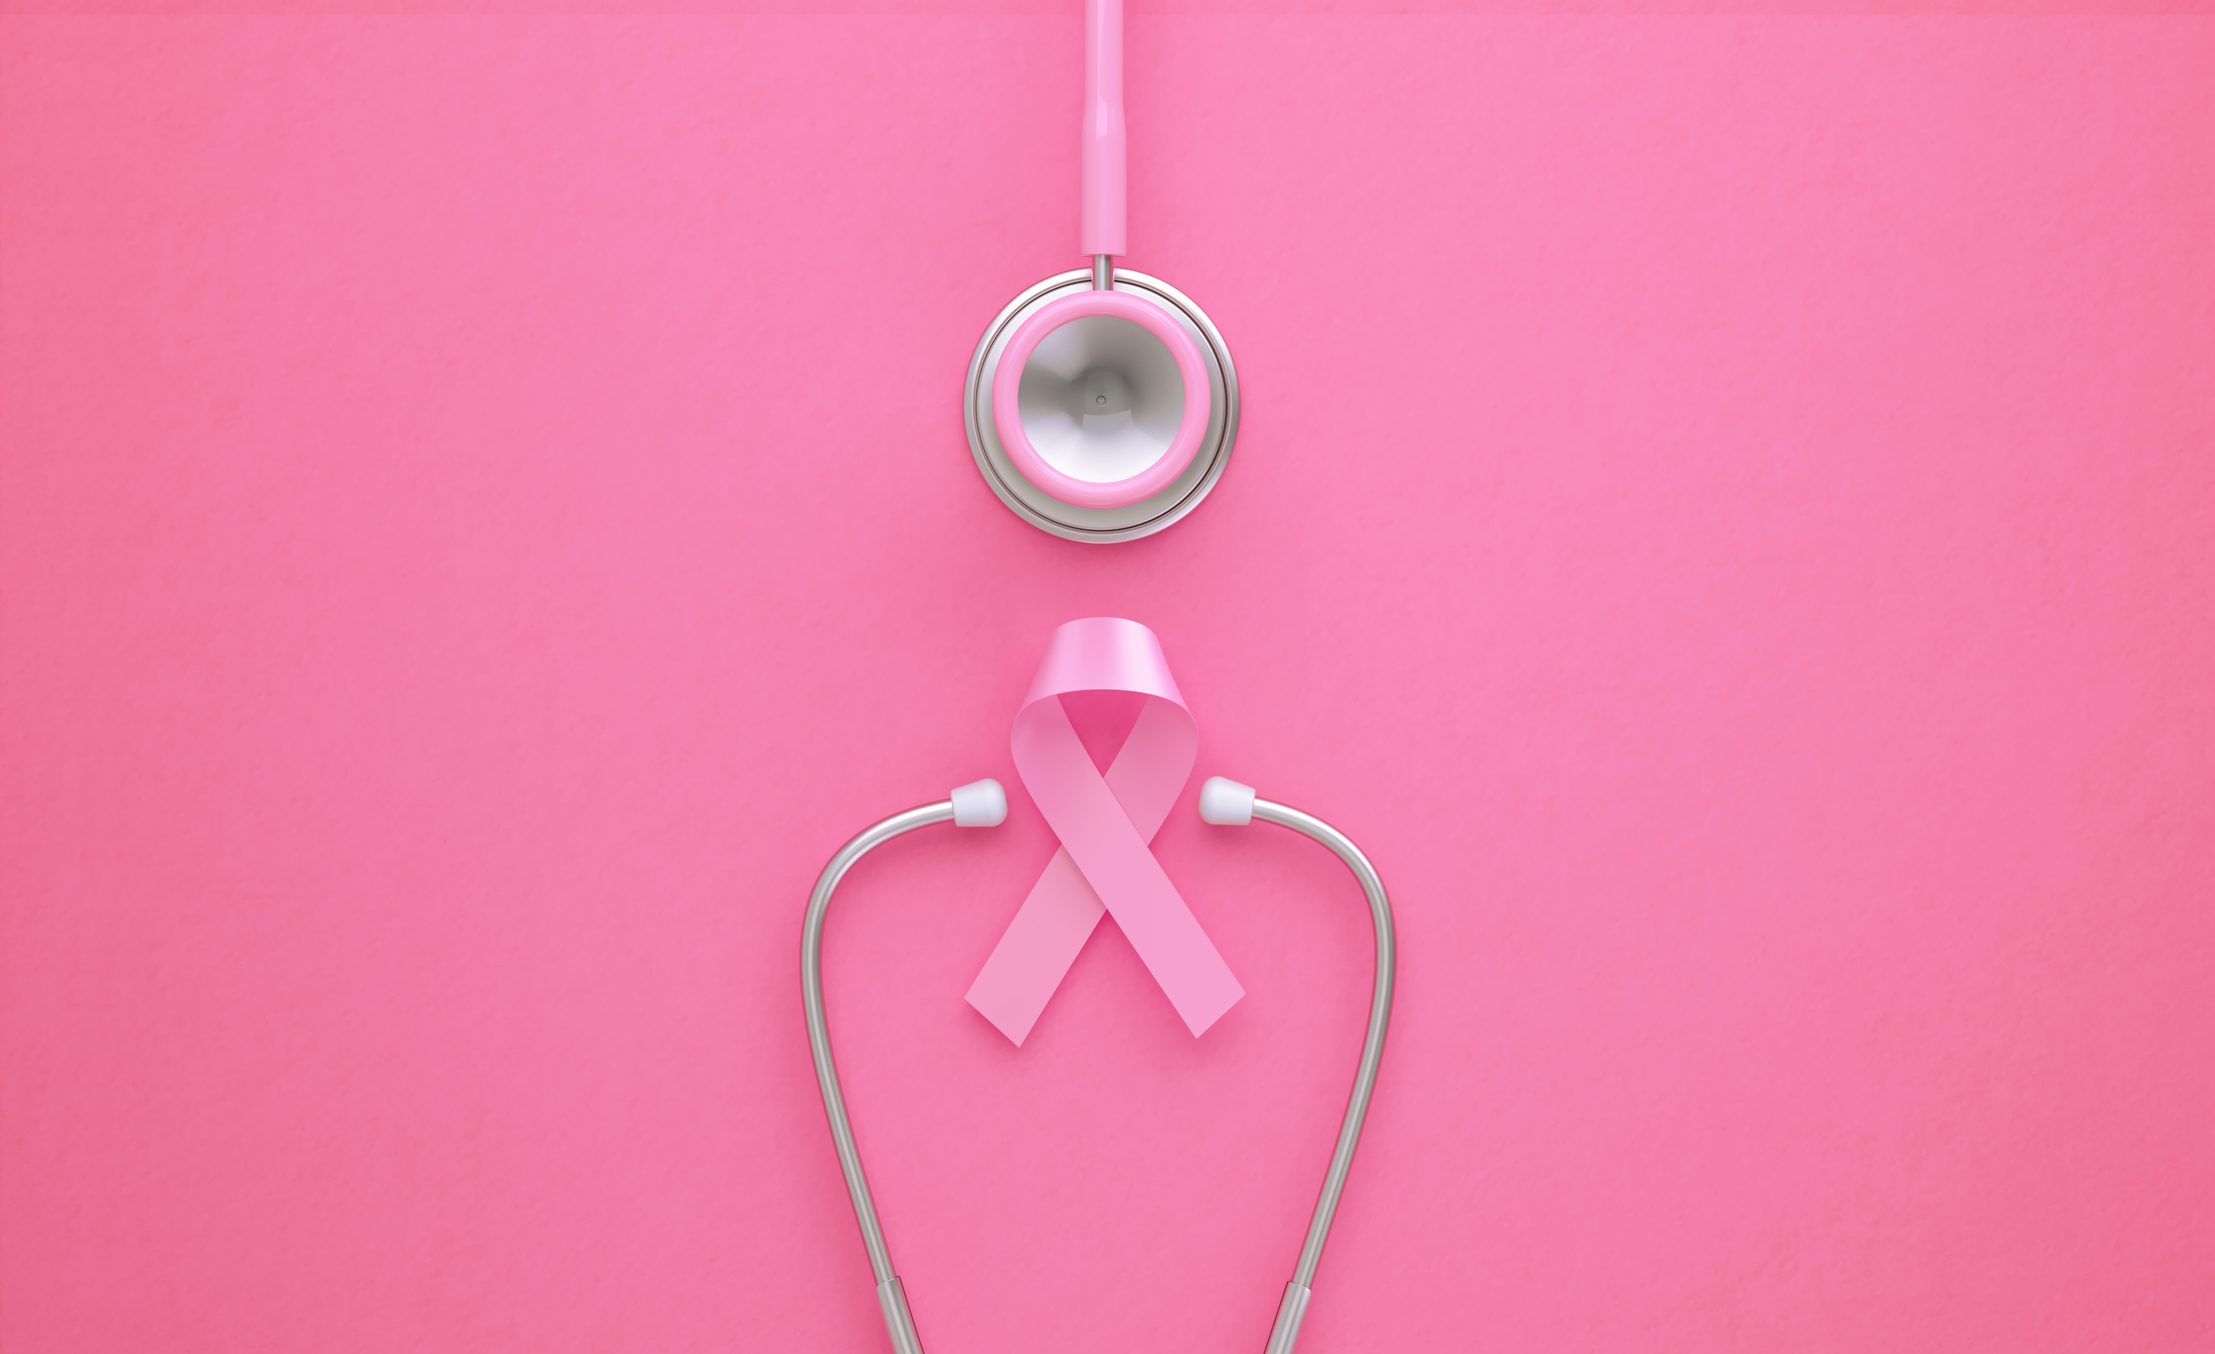 Pink Stethoscope and Pink Breast Cancer Awareness Ribbon on Pink Background